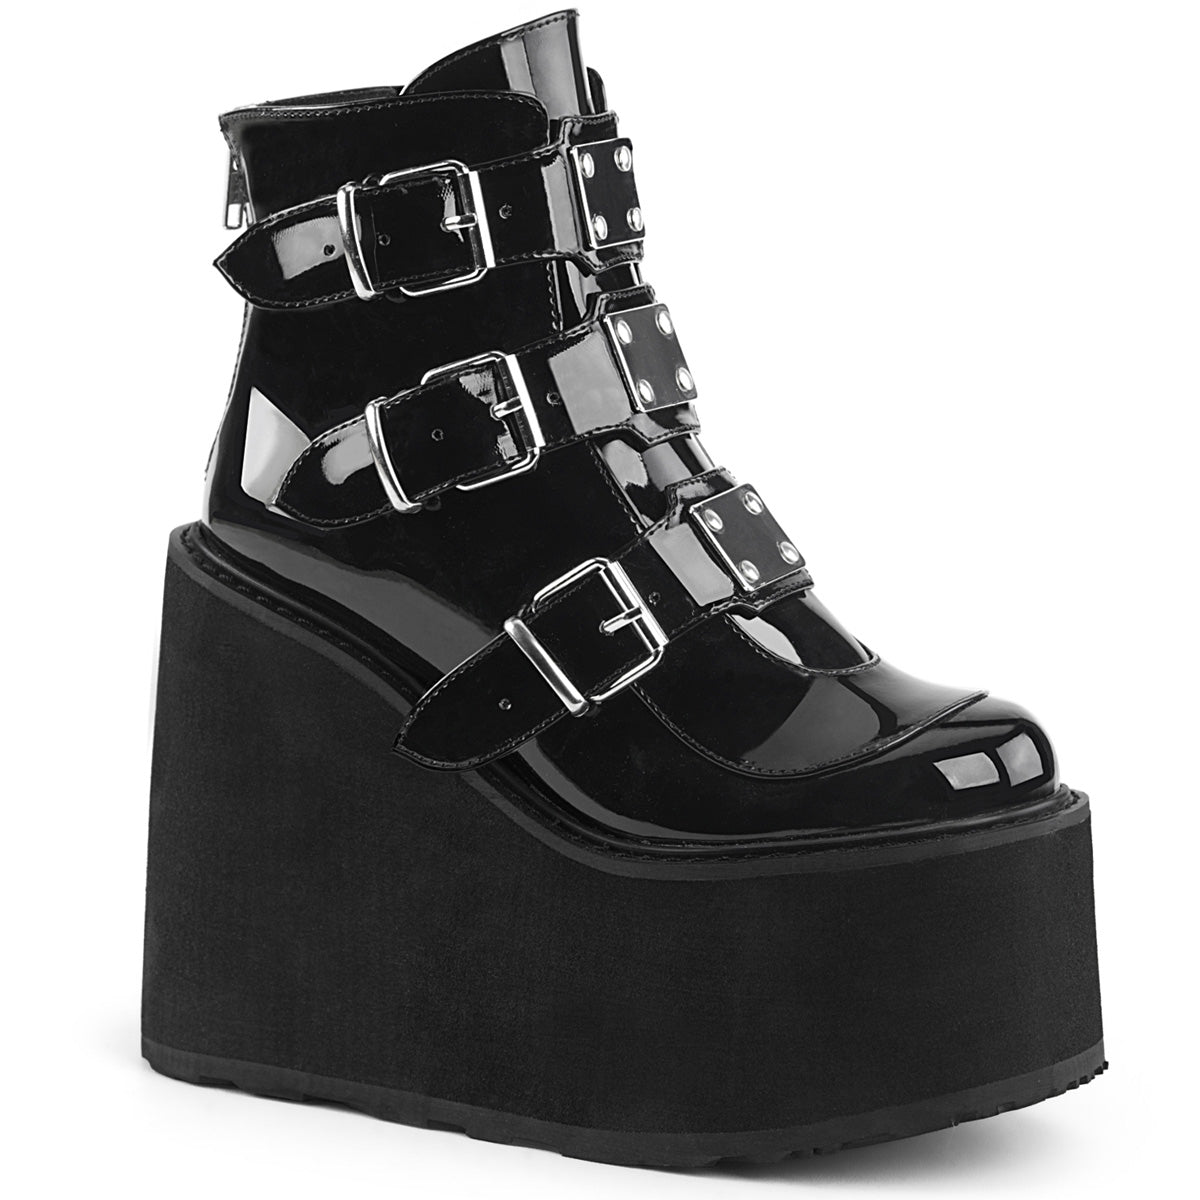 Too Fast | Demonia Swing 105 | Black Patent Leather Women's Ankle Boots